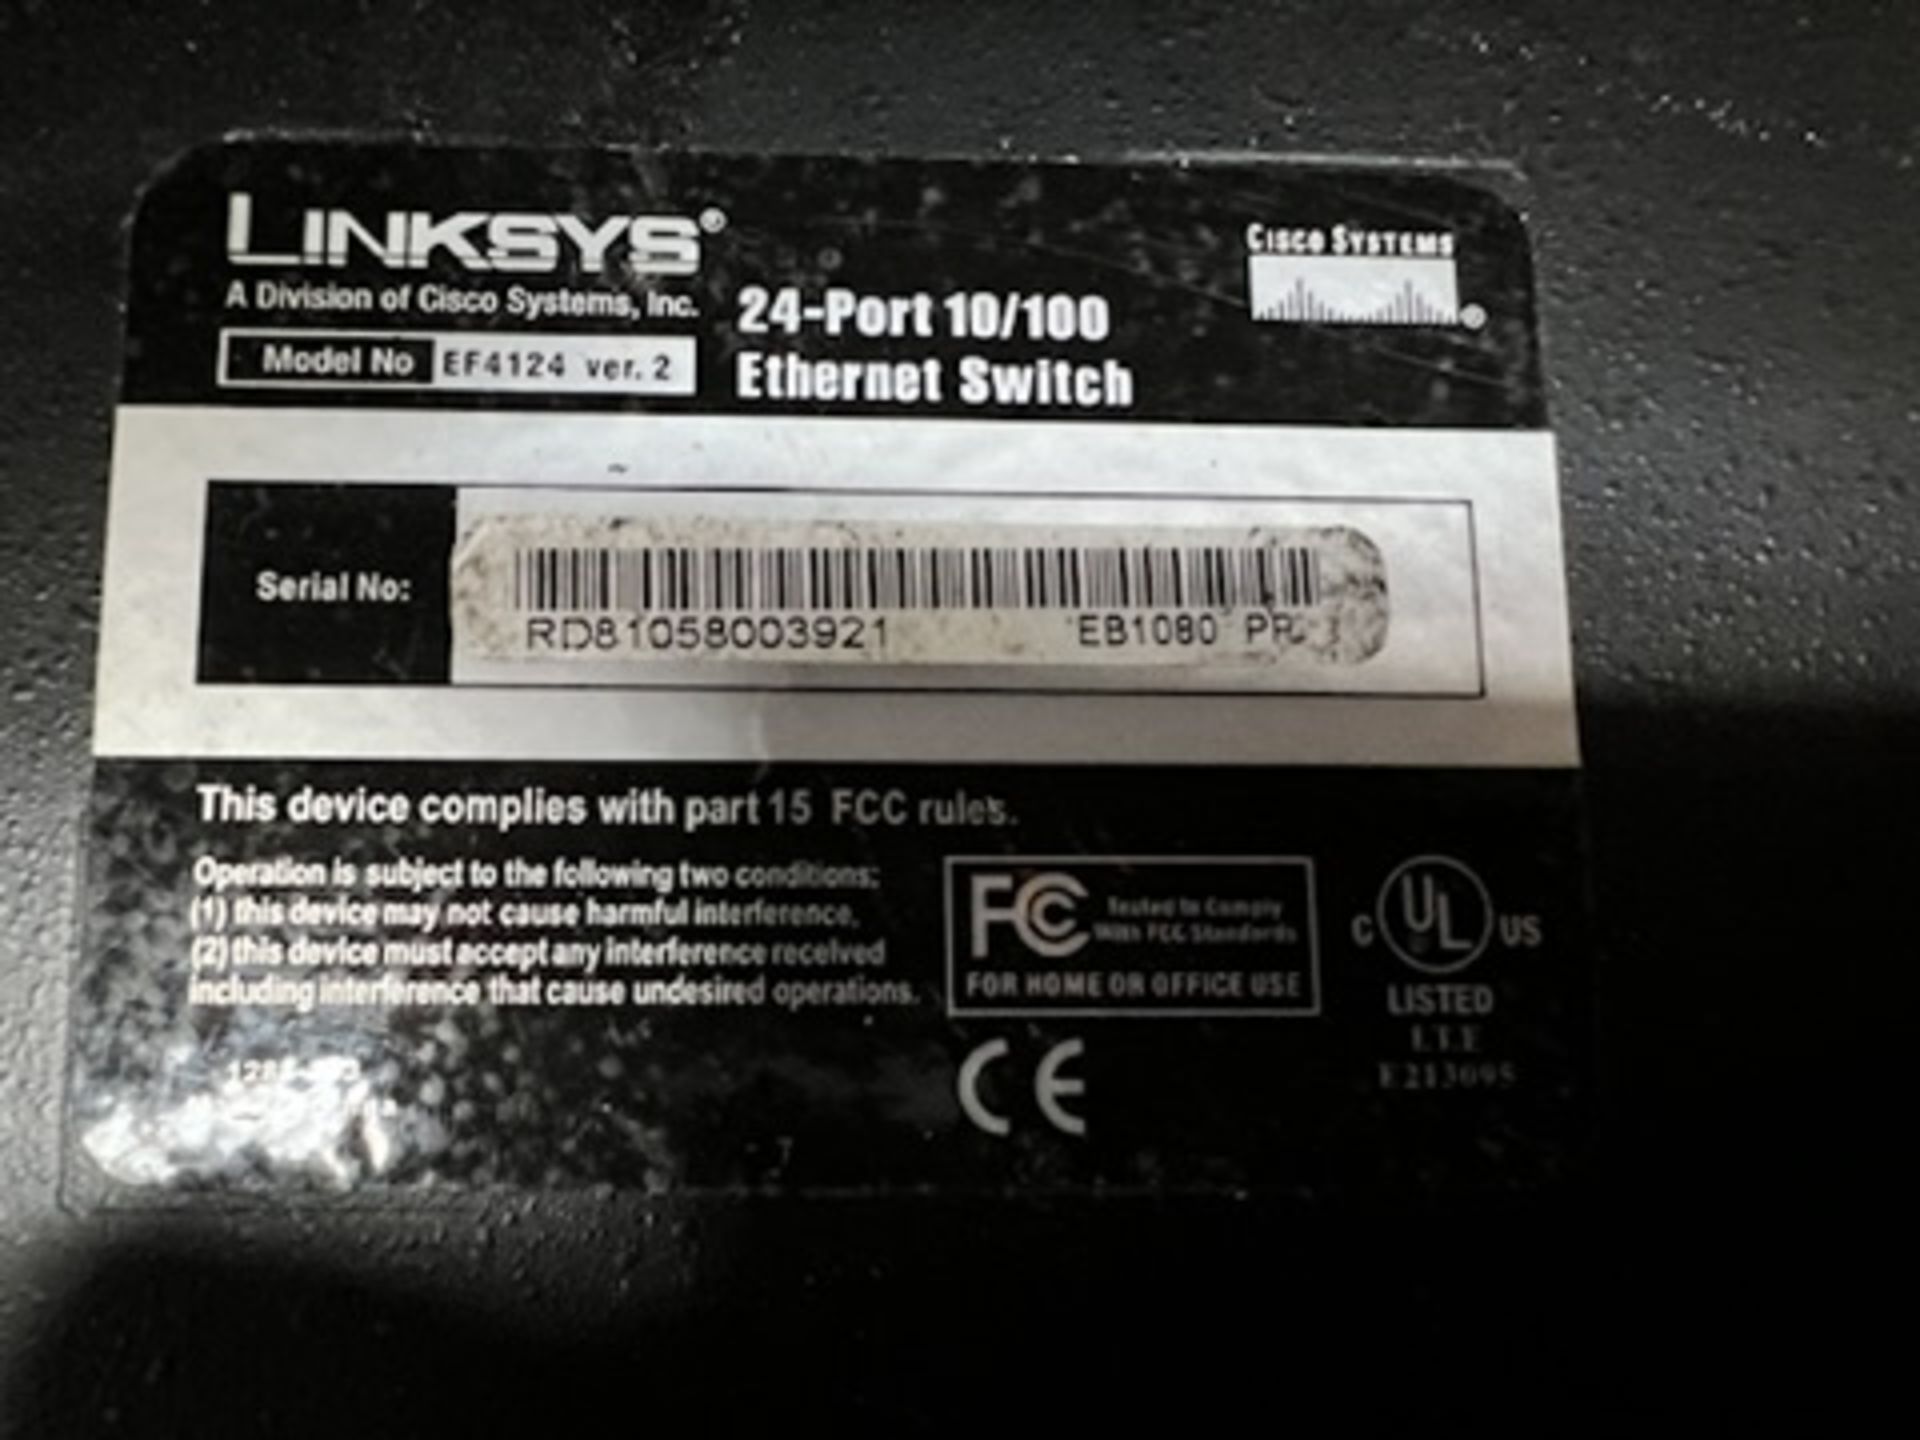 Lot of: (2) Cisco 2500 series routers , (1) Cisco IAD 2400 Series router, (2) Linksys 24-port intern - Image 18 of 18